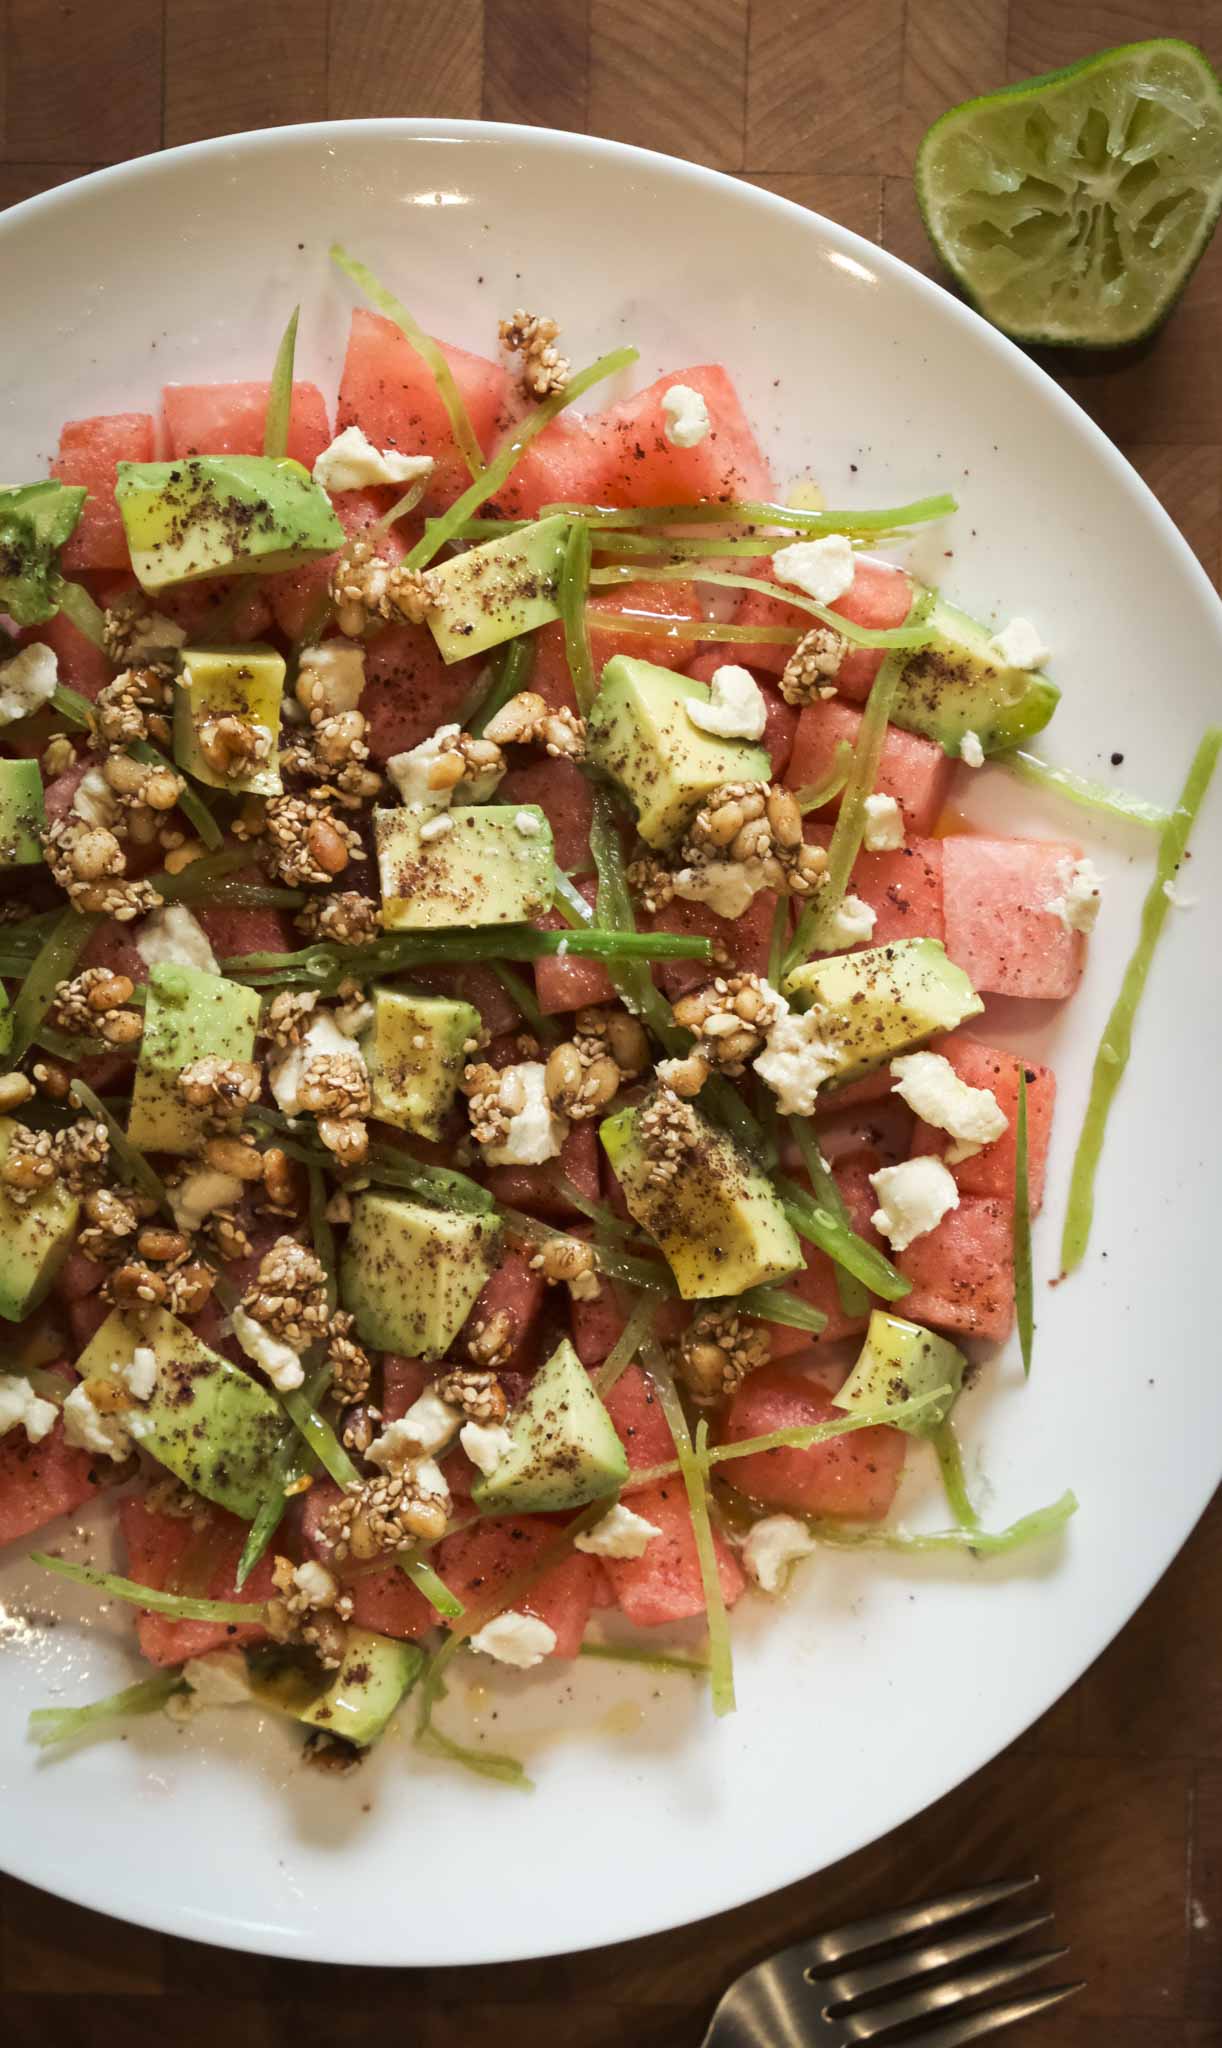 What to serve with watermelon feta salad